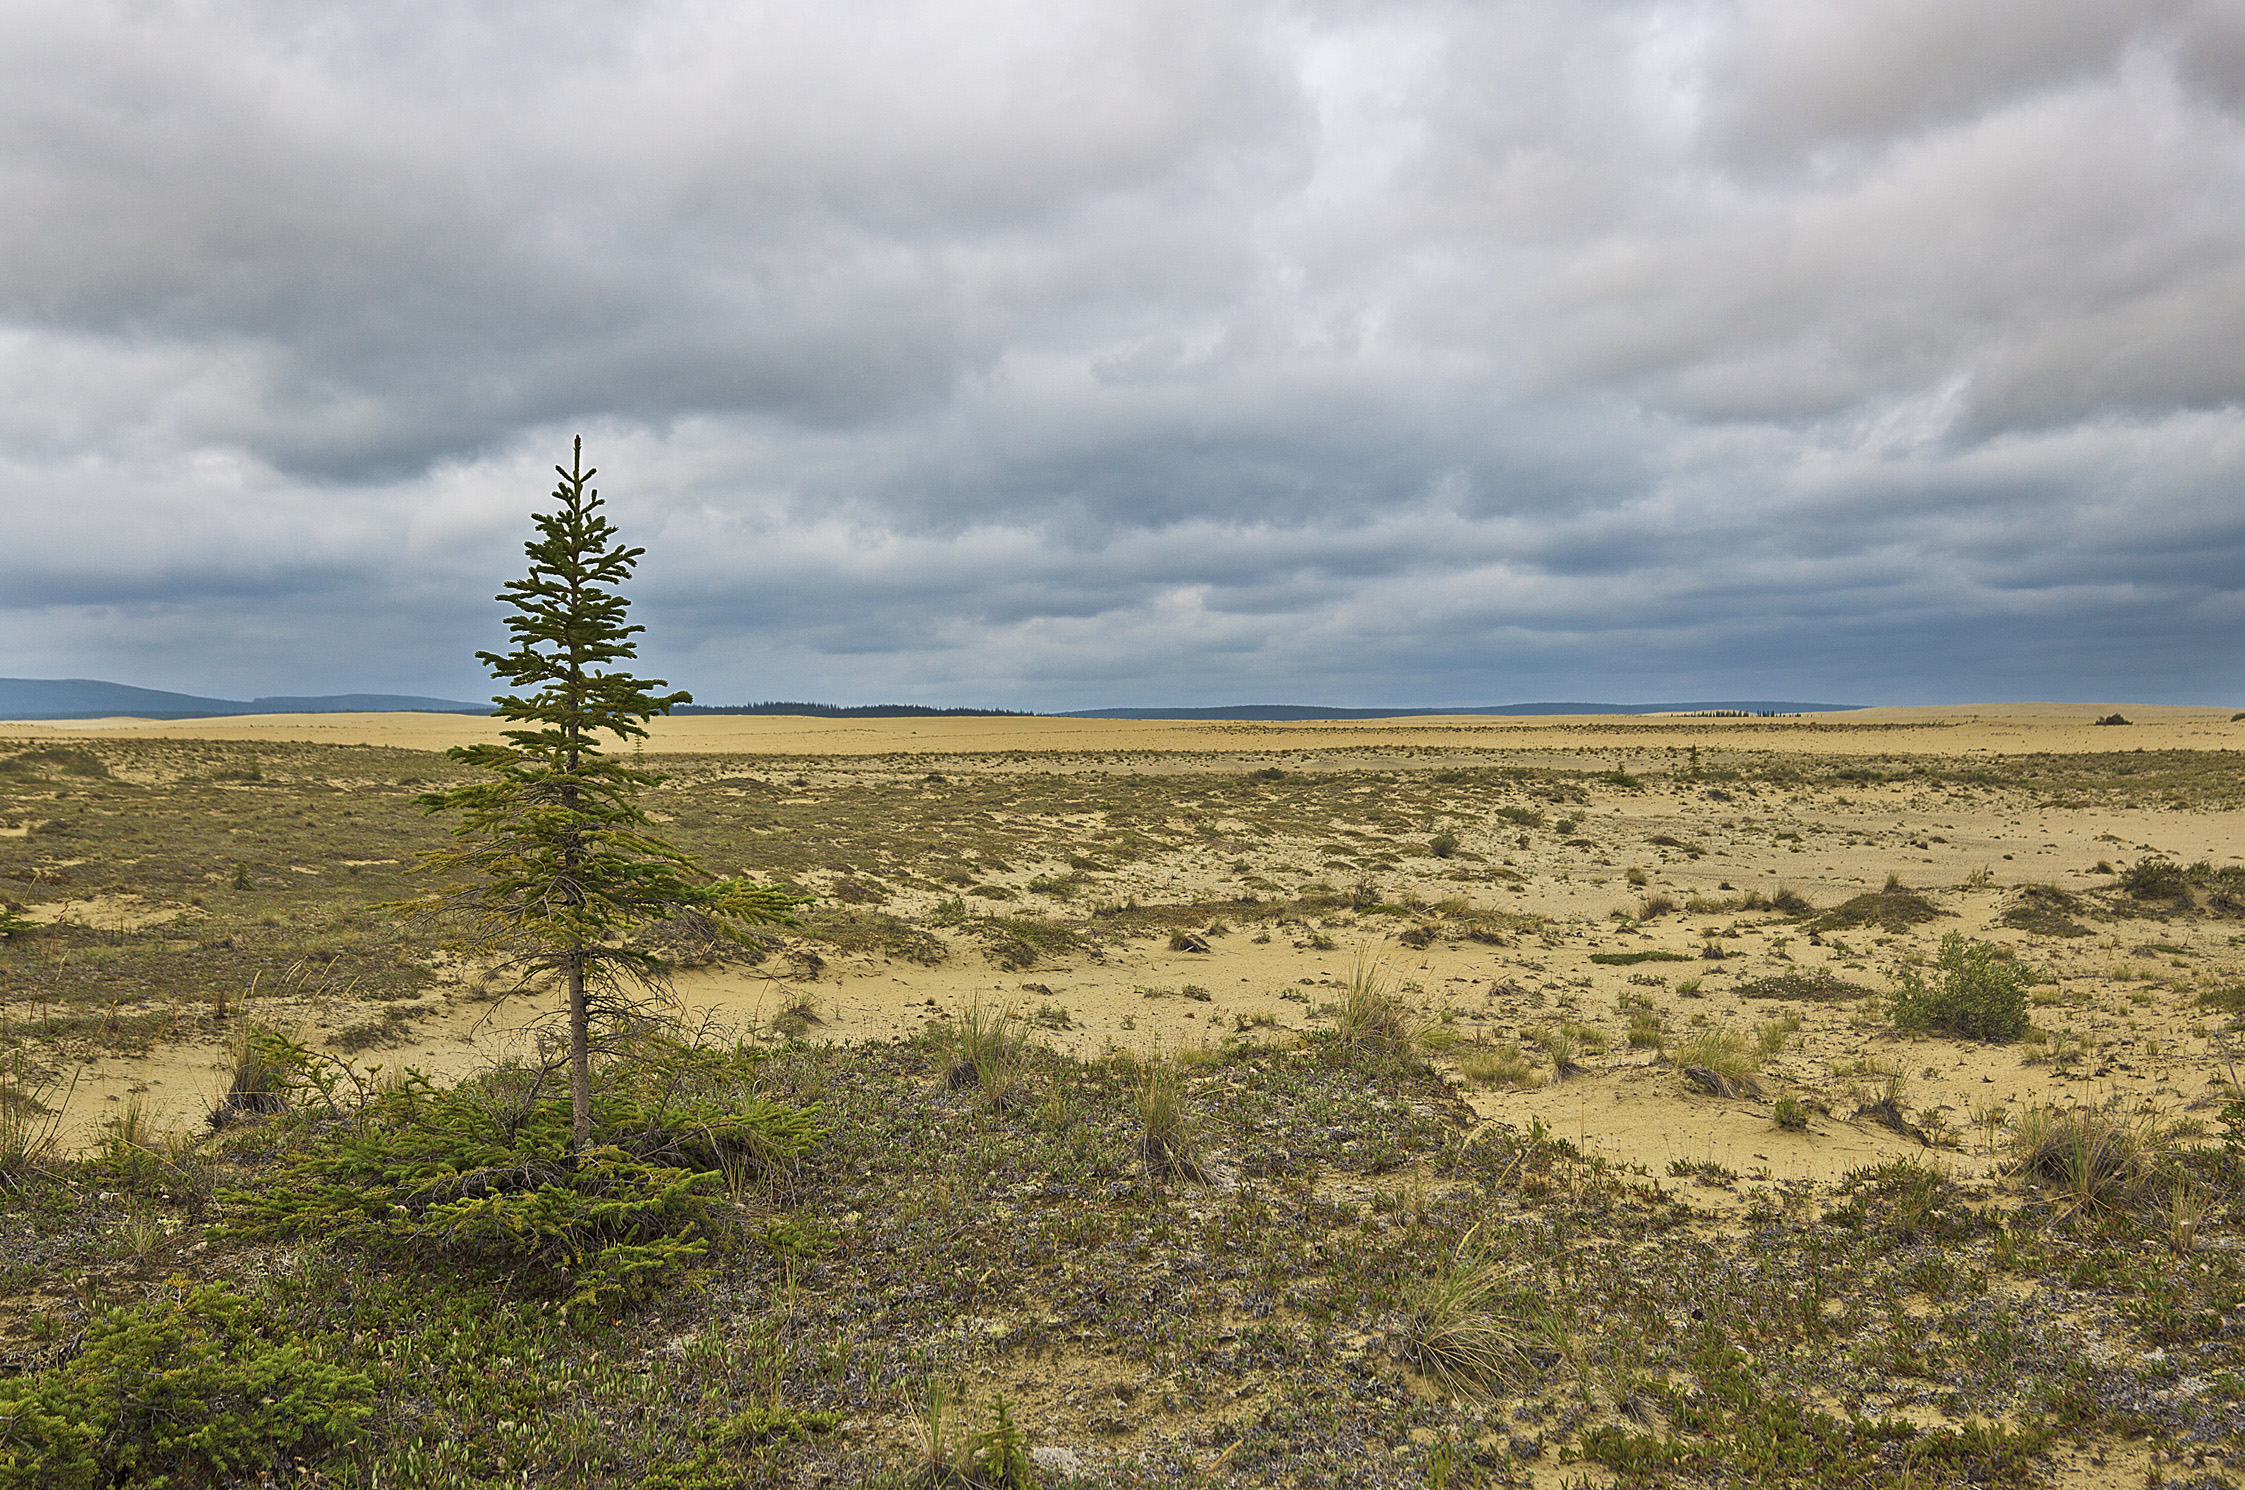 A rogue tree in Kobuk Valley